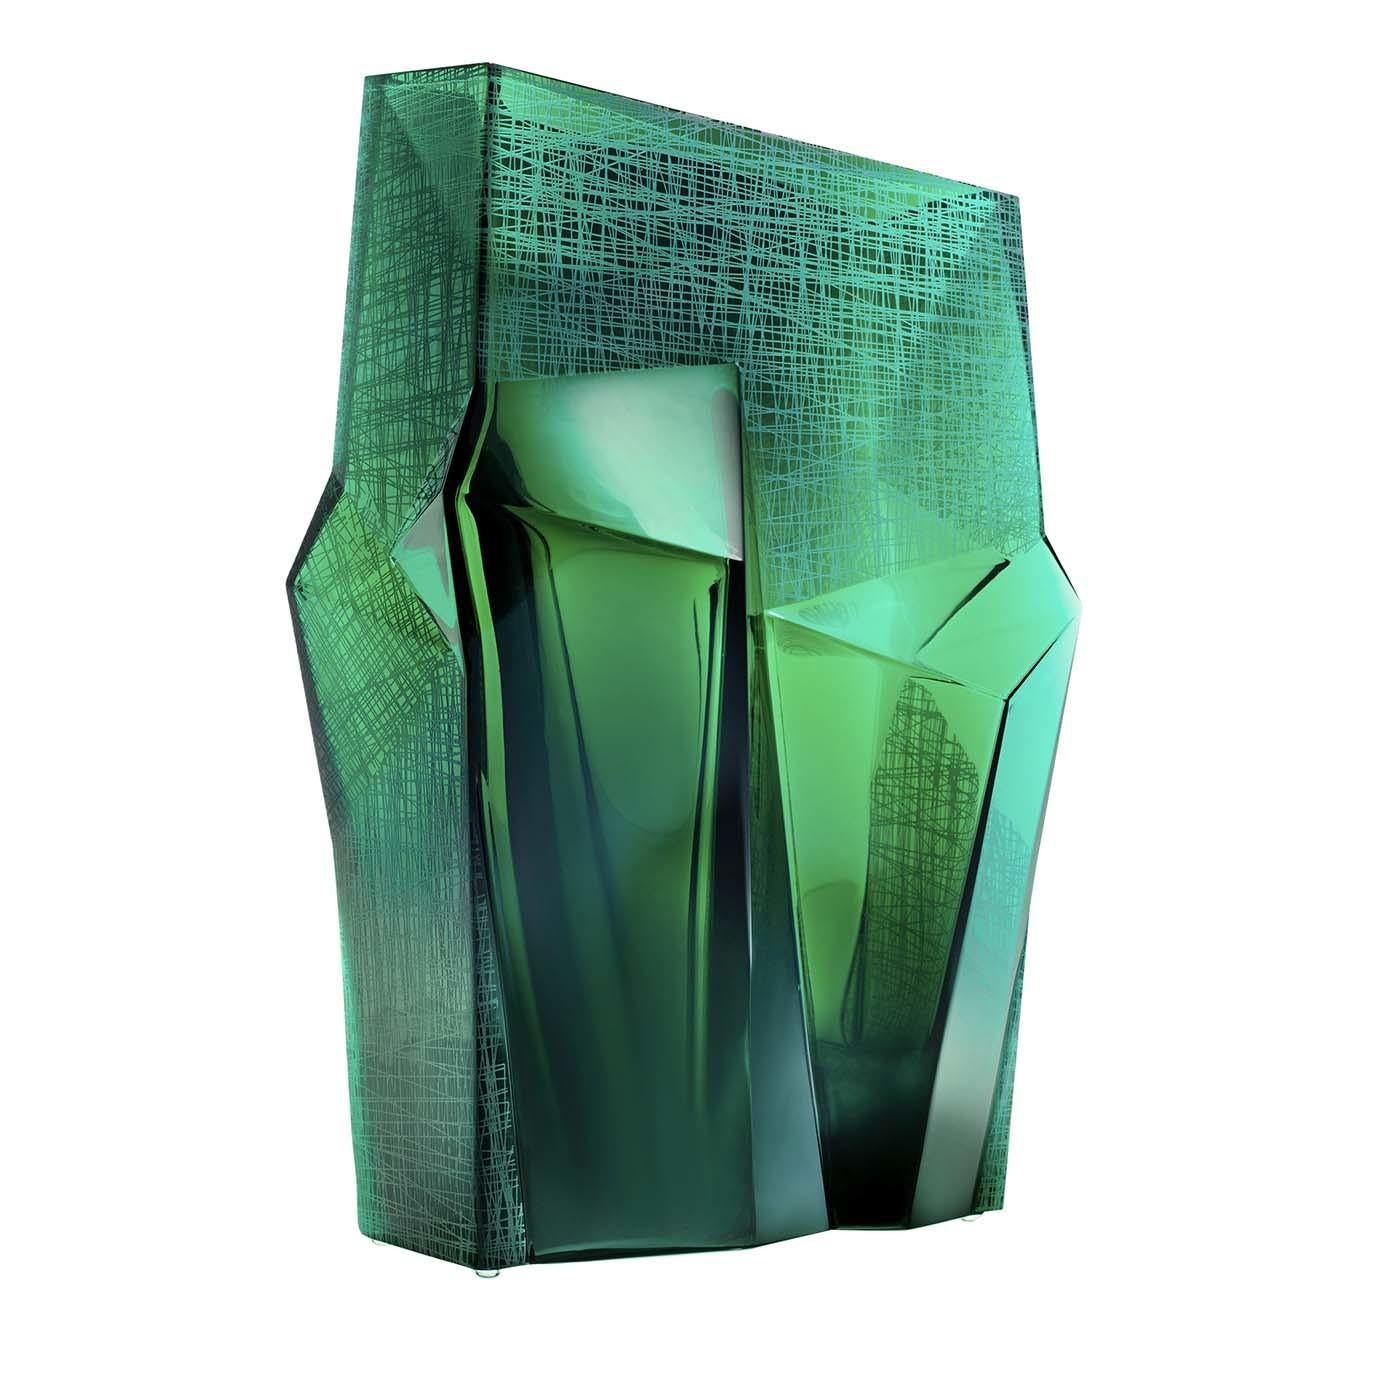 A superb work of modern art, this vase boasts strong visual impact, inspired by the volumes of the metropolis envisioned by Fritz Lang in the namesake movie. Boasting a series of asymmetric lines that jolt upwards, reminiscent of expressionism, the